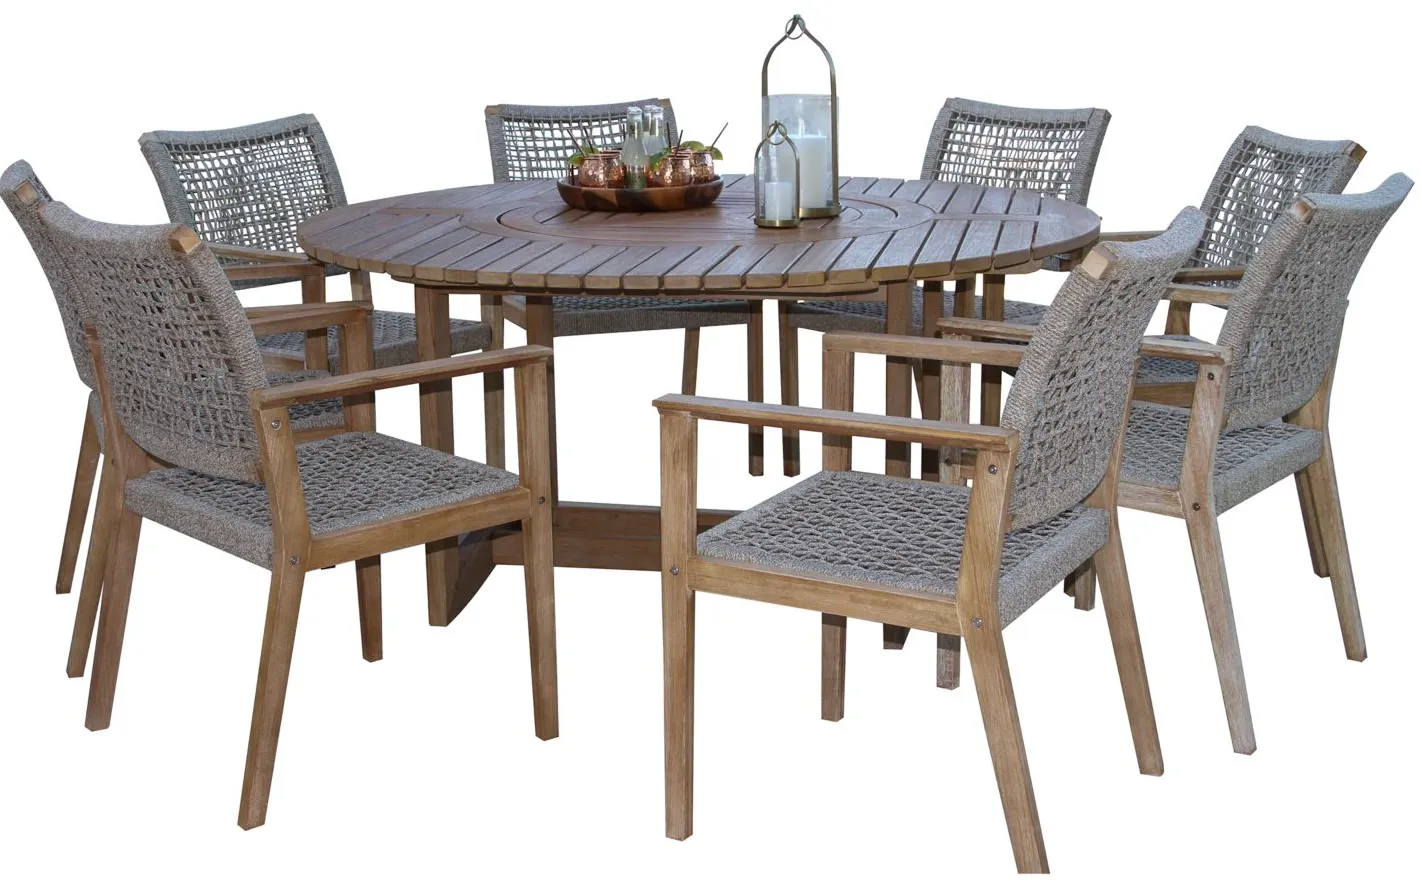 Nautical 9 pc. Lazy Susan Table with Rope Chairs in Wheat by Outdoor Interiors